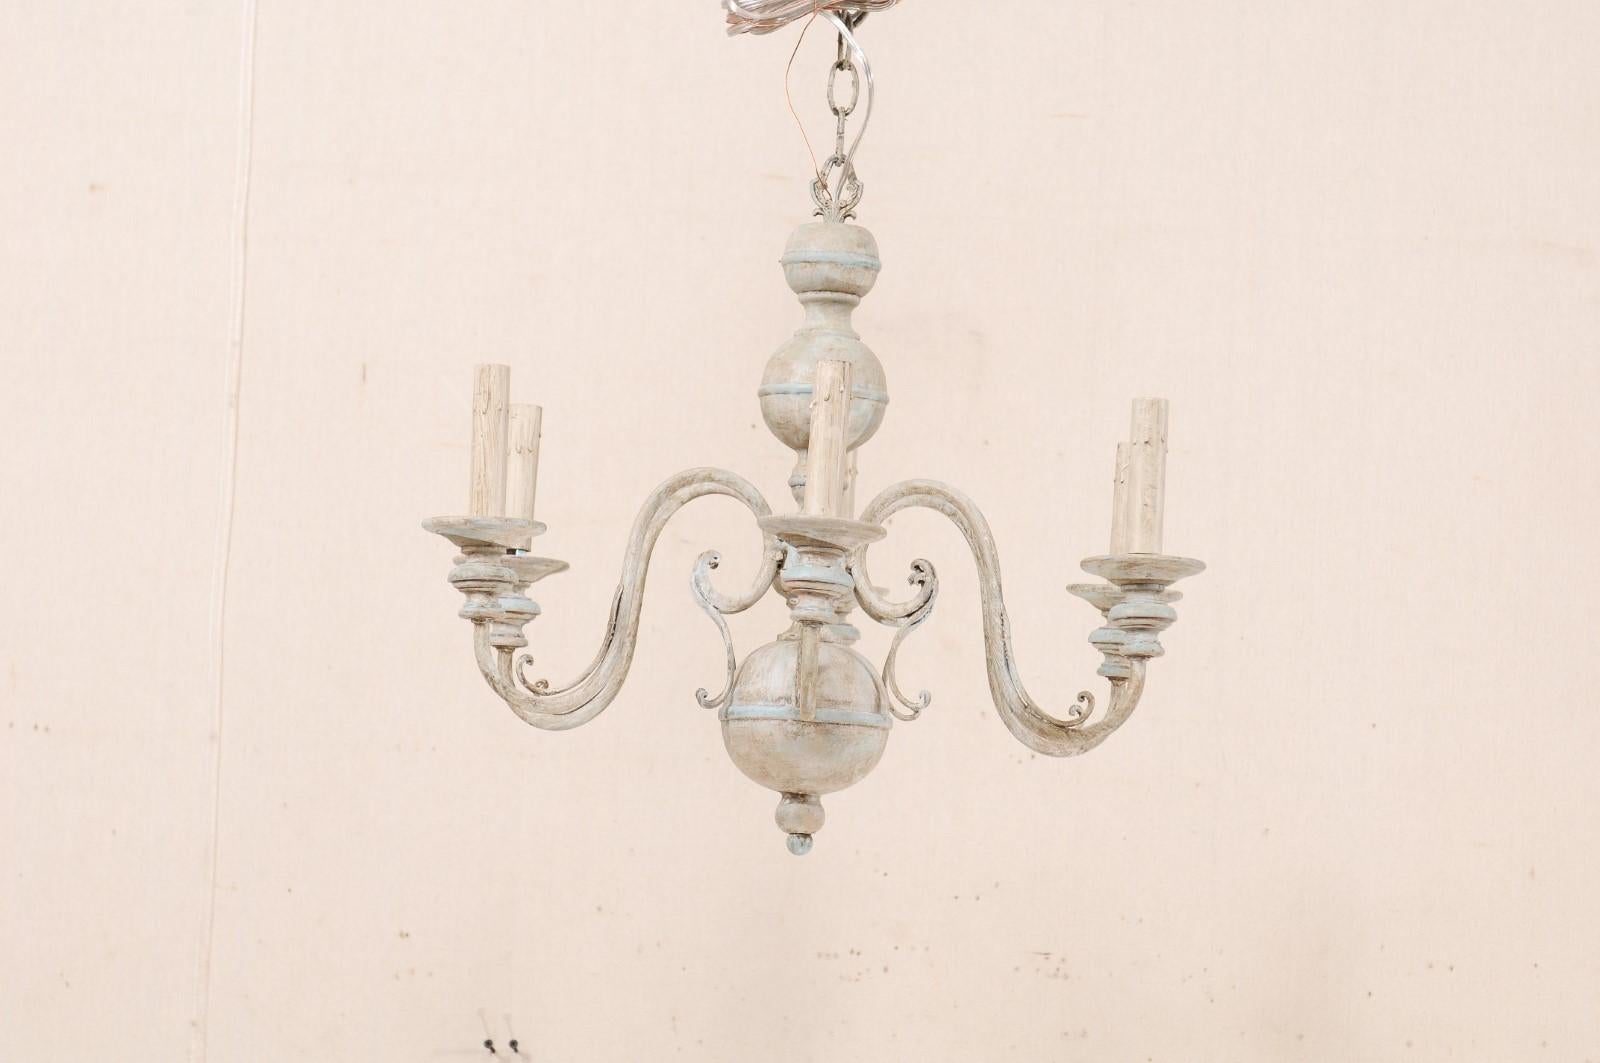 A French six-light painted wood and metal chandelier. This lovely mid-20th century French chandelier features a carved wood column with fluid s-shaped swooping arms lifting up and out from it's centre. This column features a serious of bulbous